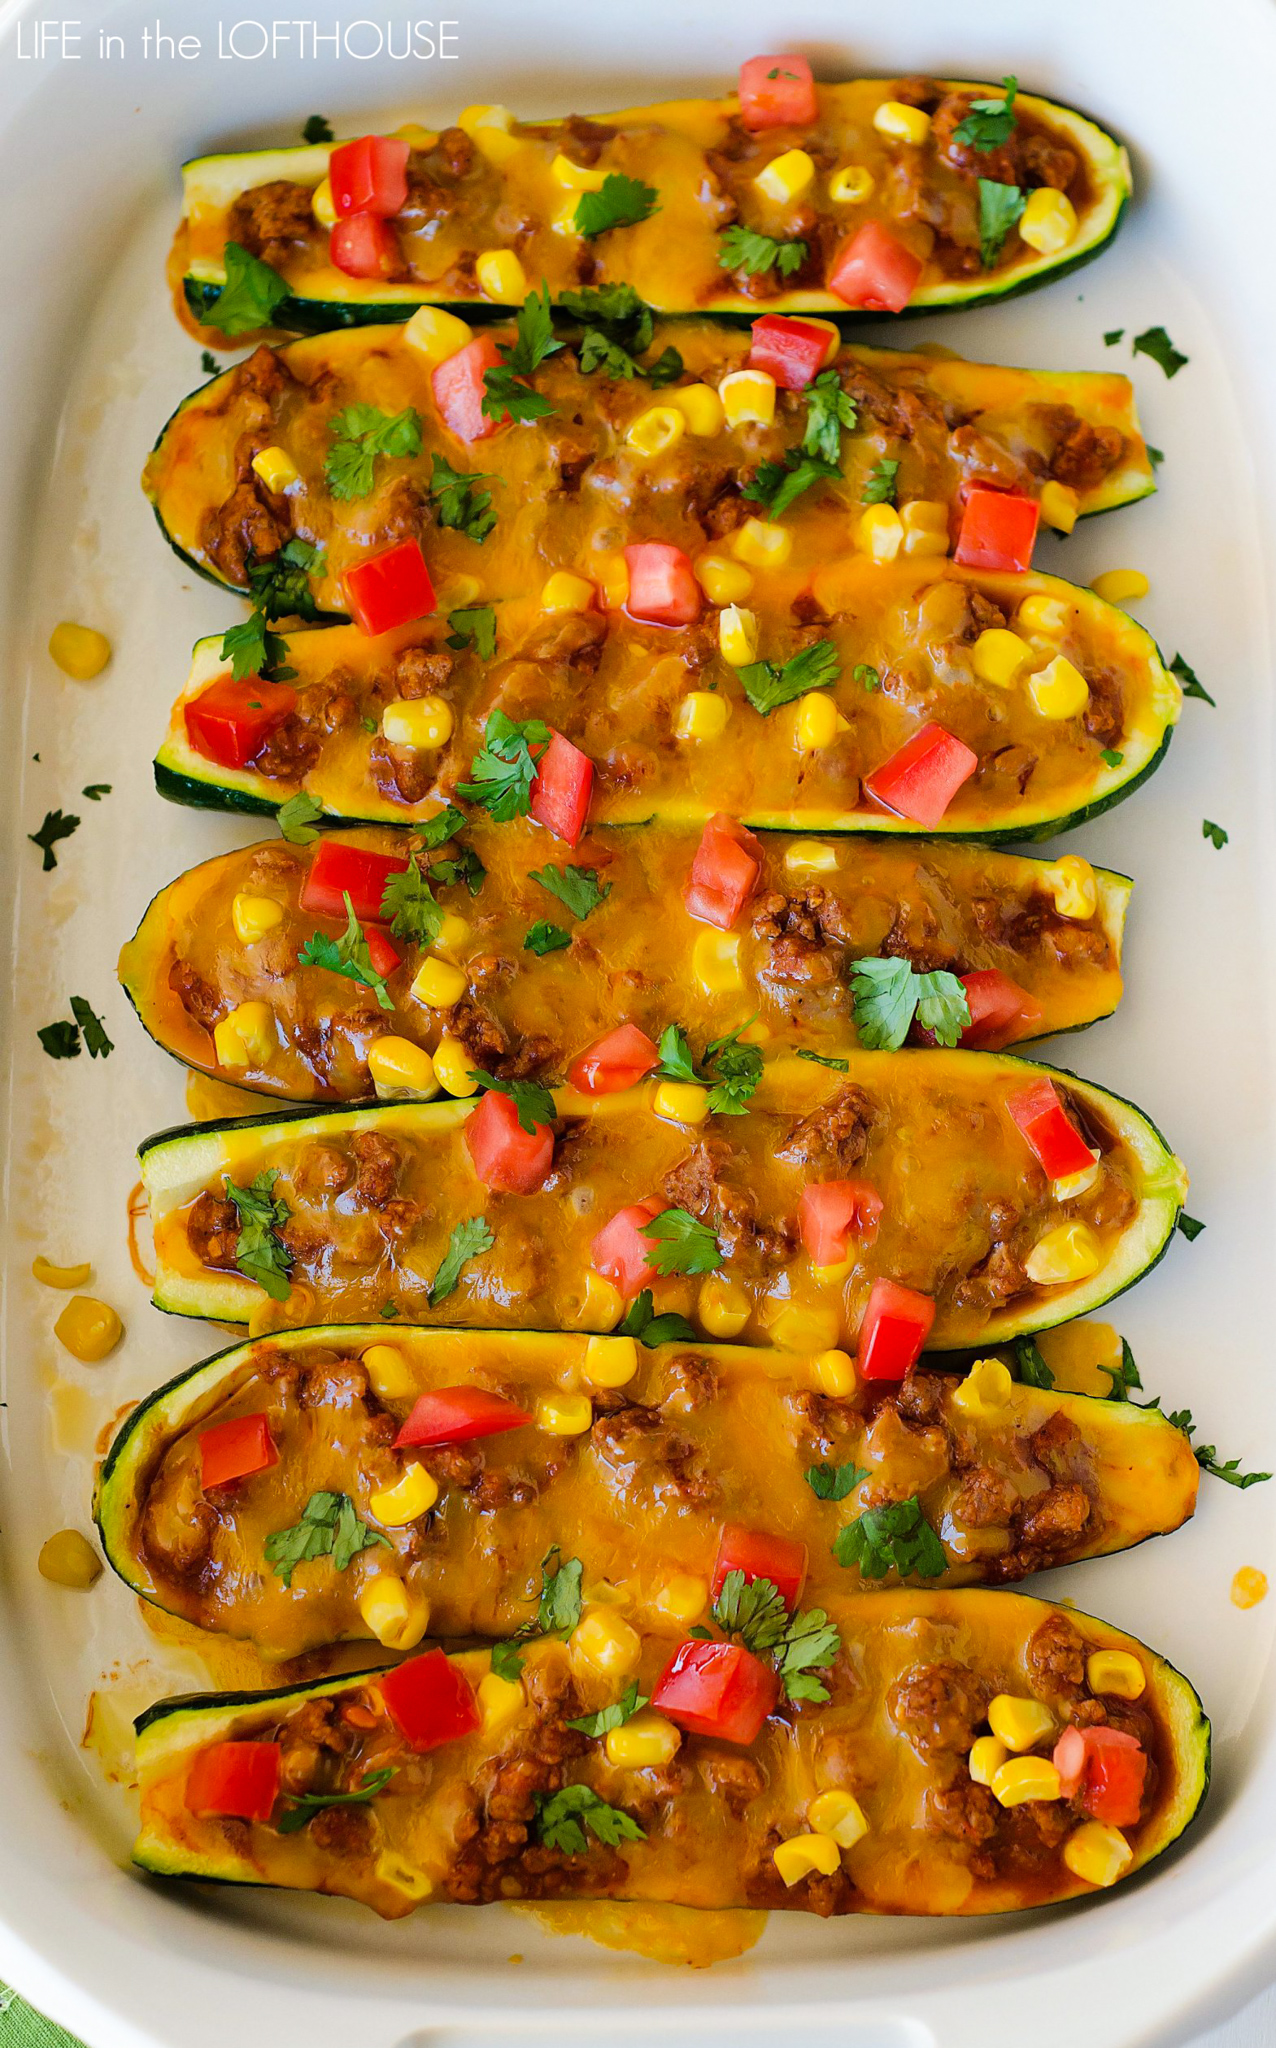 Beef enchilada zucchini boats are full of seasoned ground beef, homemade enchilada sauce and a couple veggies that are stuffed on top of zucchini. Life-in-the-Lofthouse.com